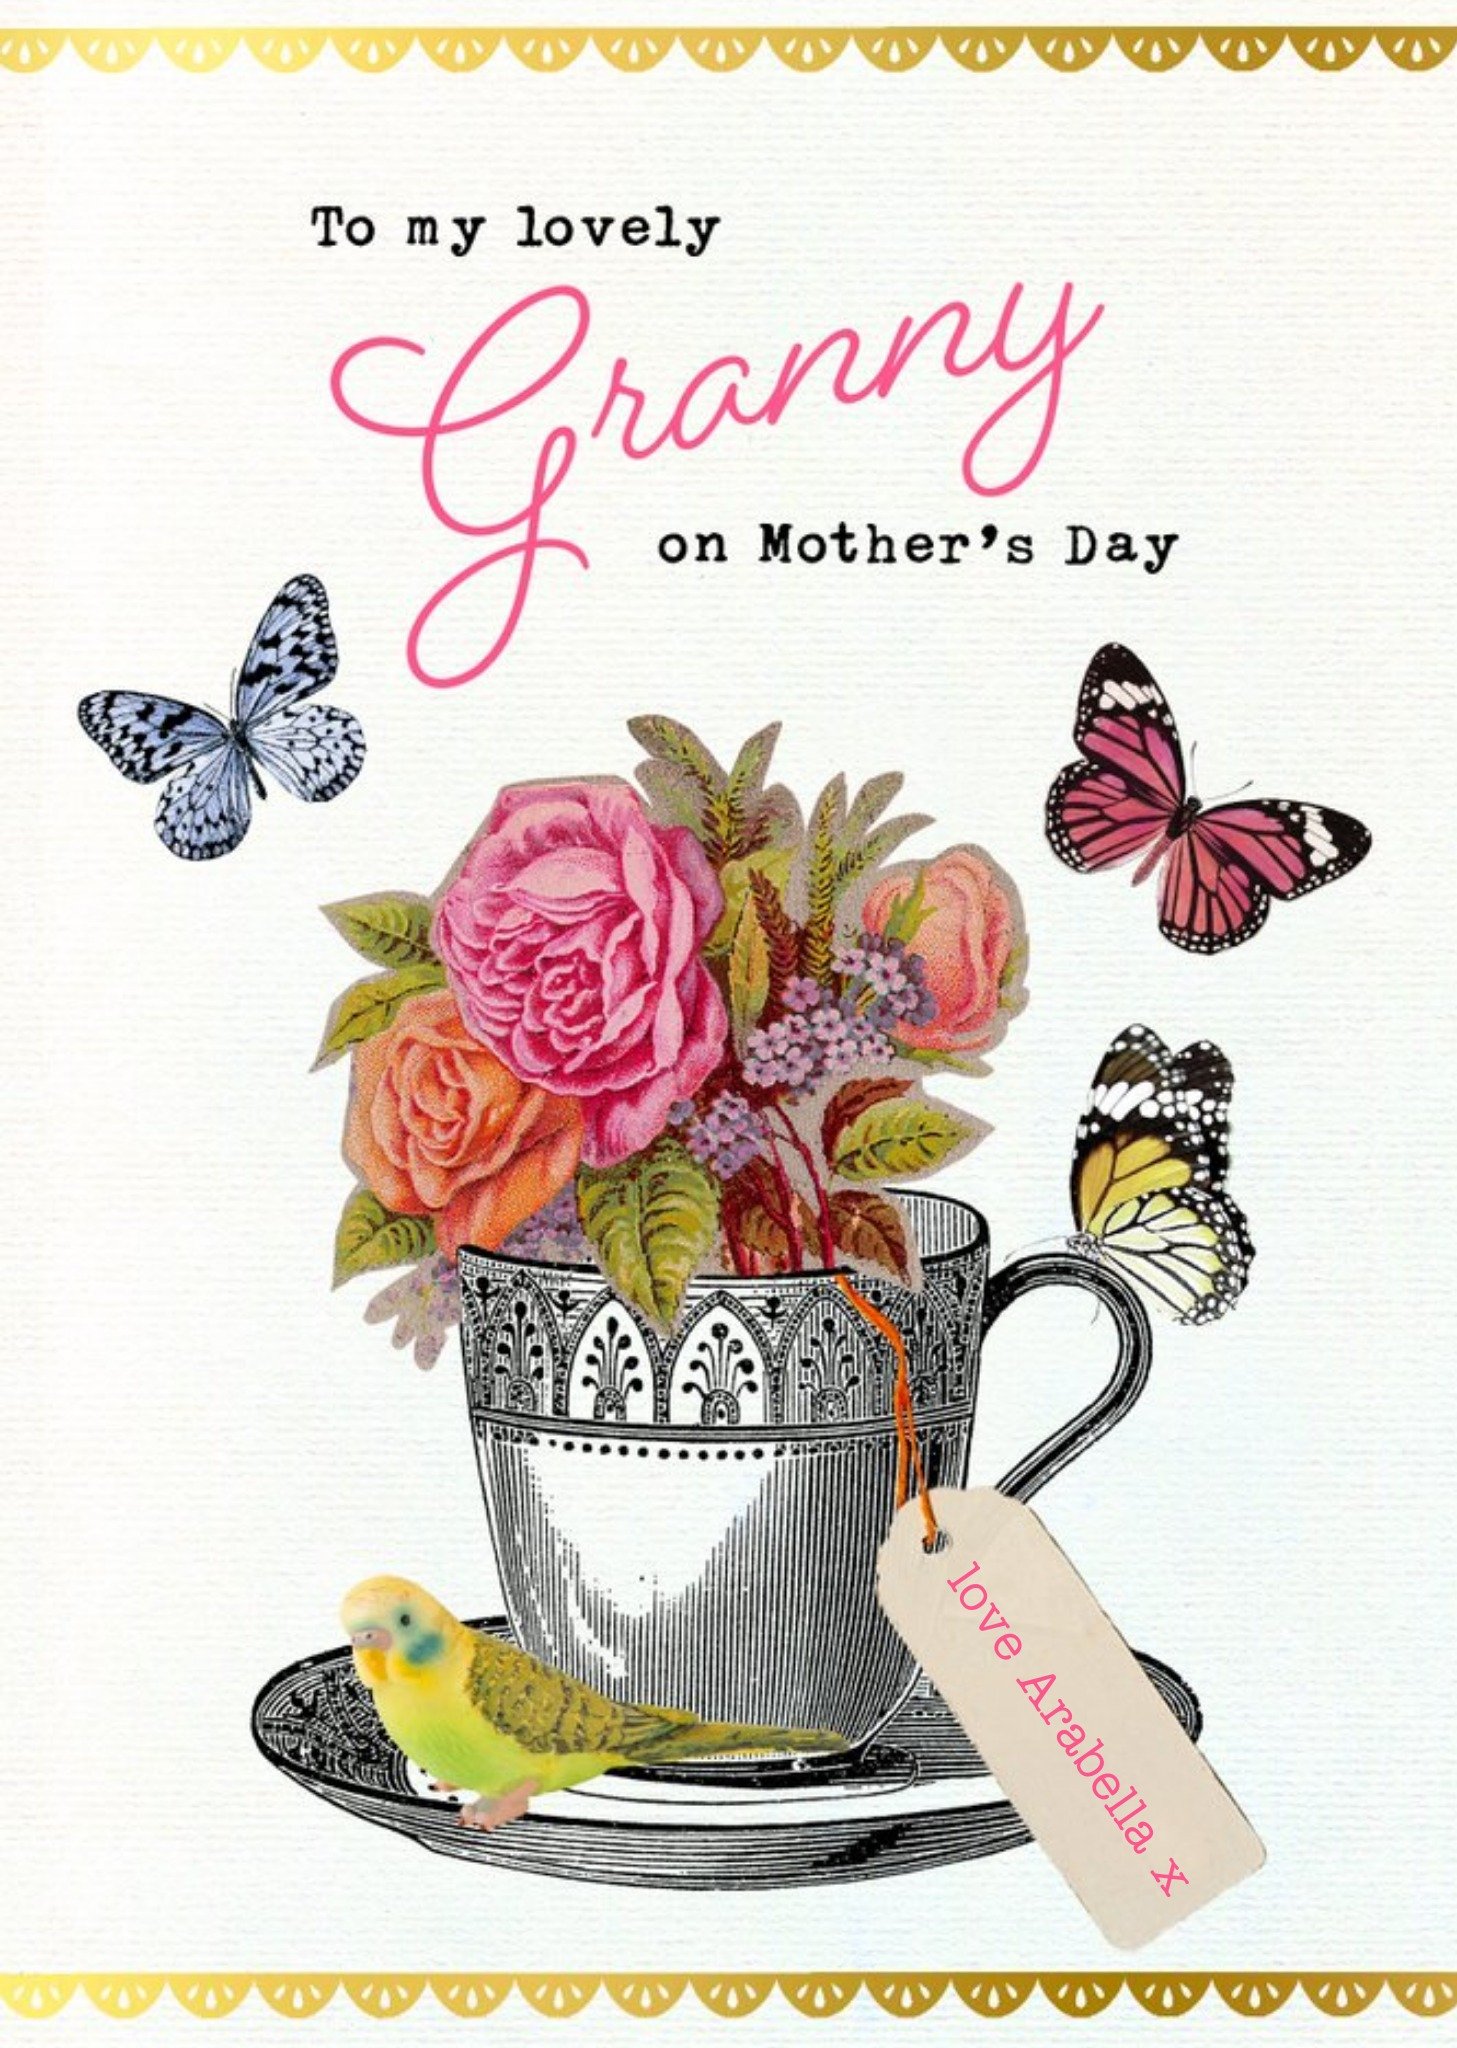 Moonpig Vintage Flowers Butterflies Lovely Granny Mother's Day Card Ecard